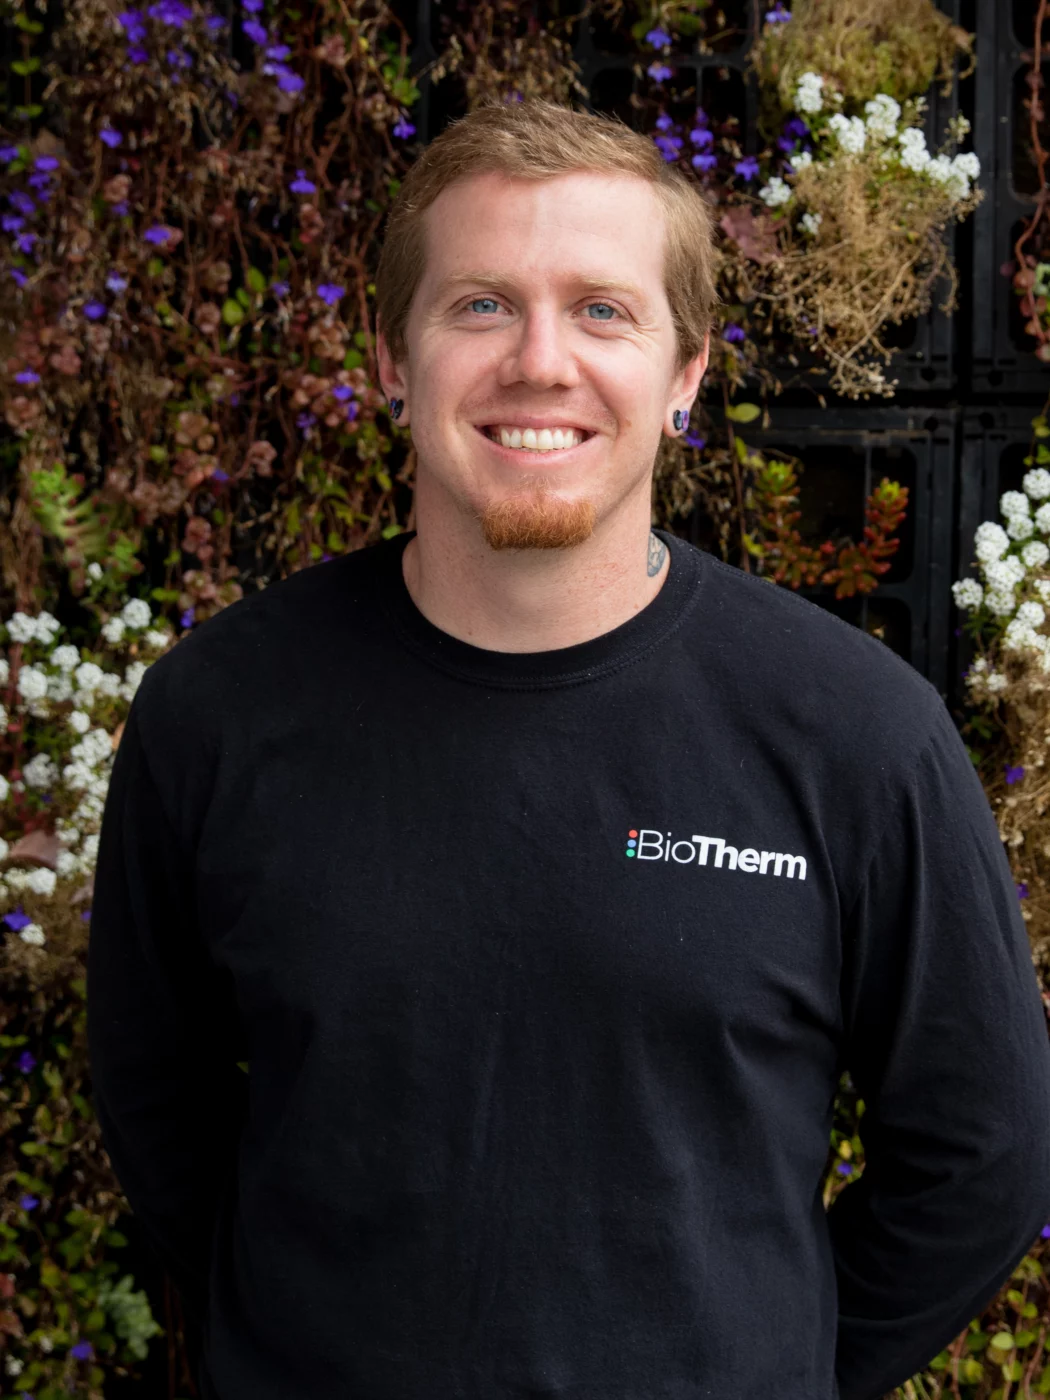 biotherm solutions staff member chris rinella